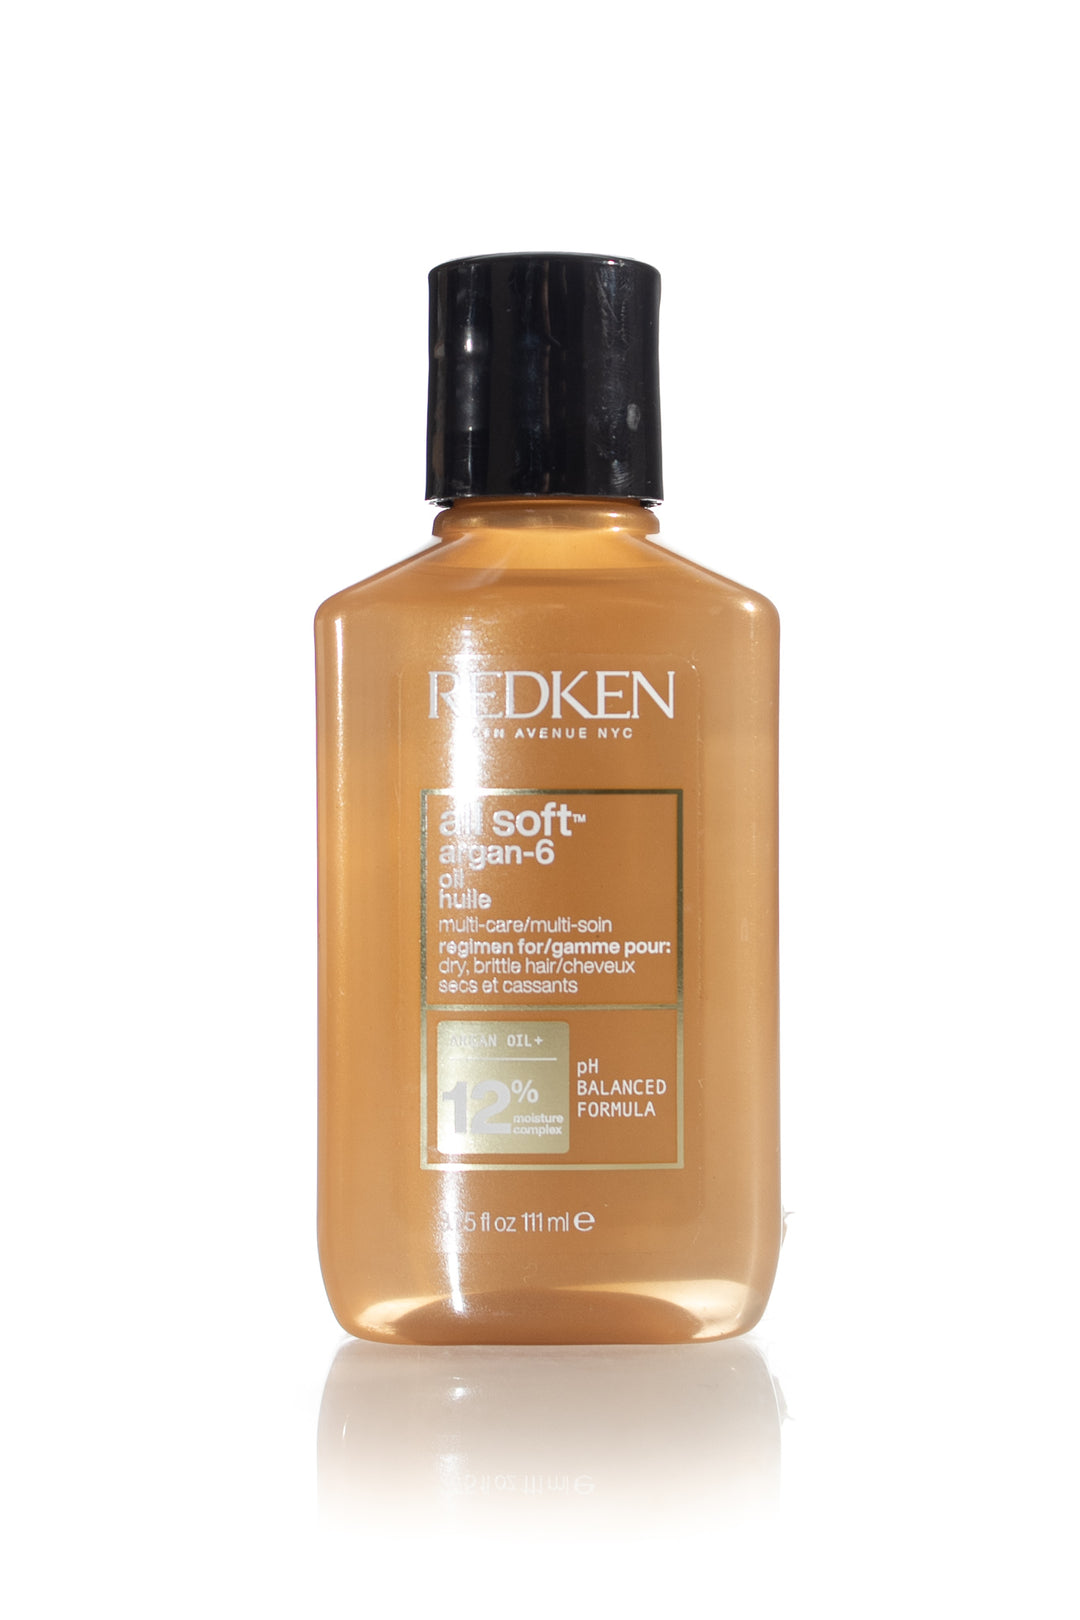 Natural argan oil for dry and brittle hair that provides softness, deep conditioning and shine.